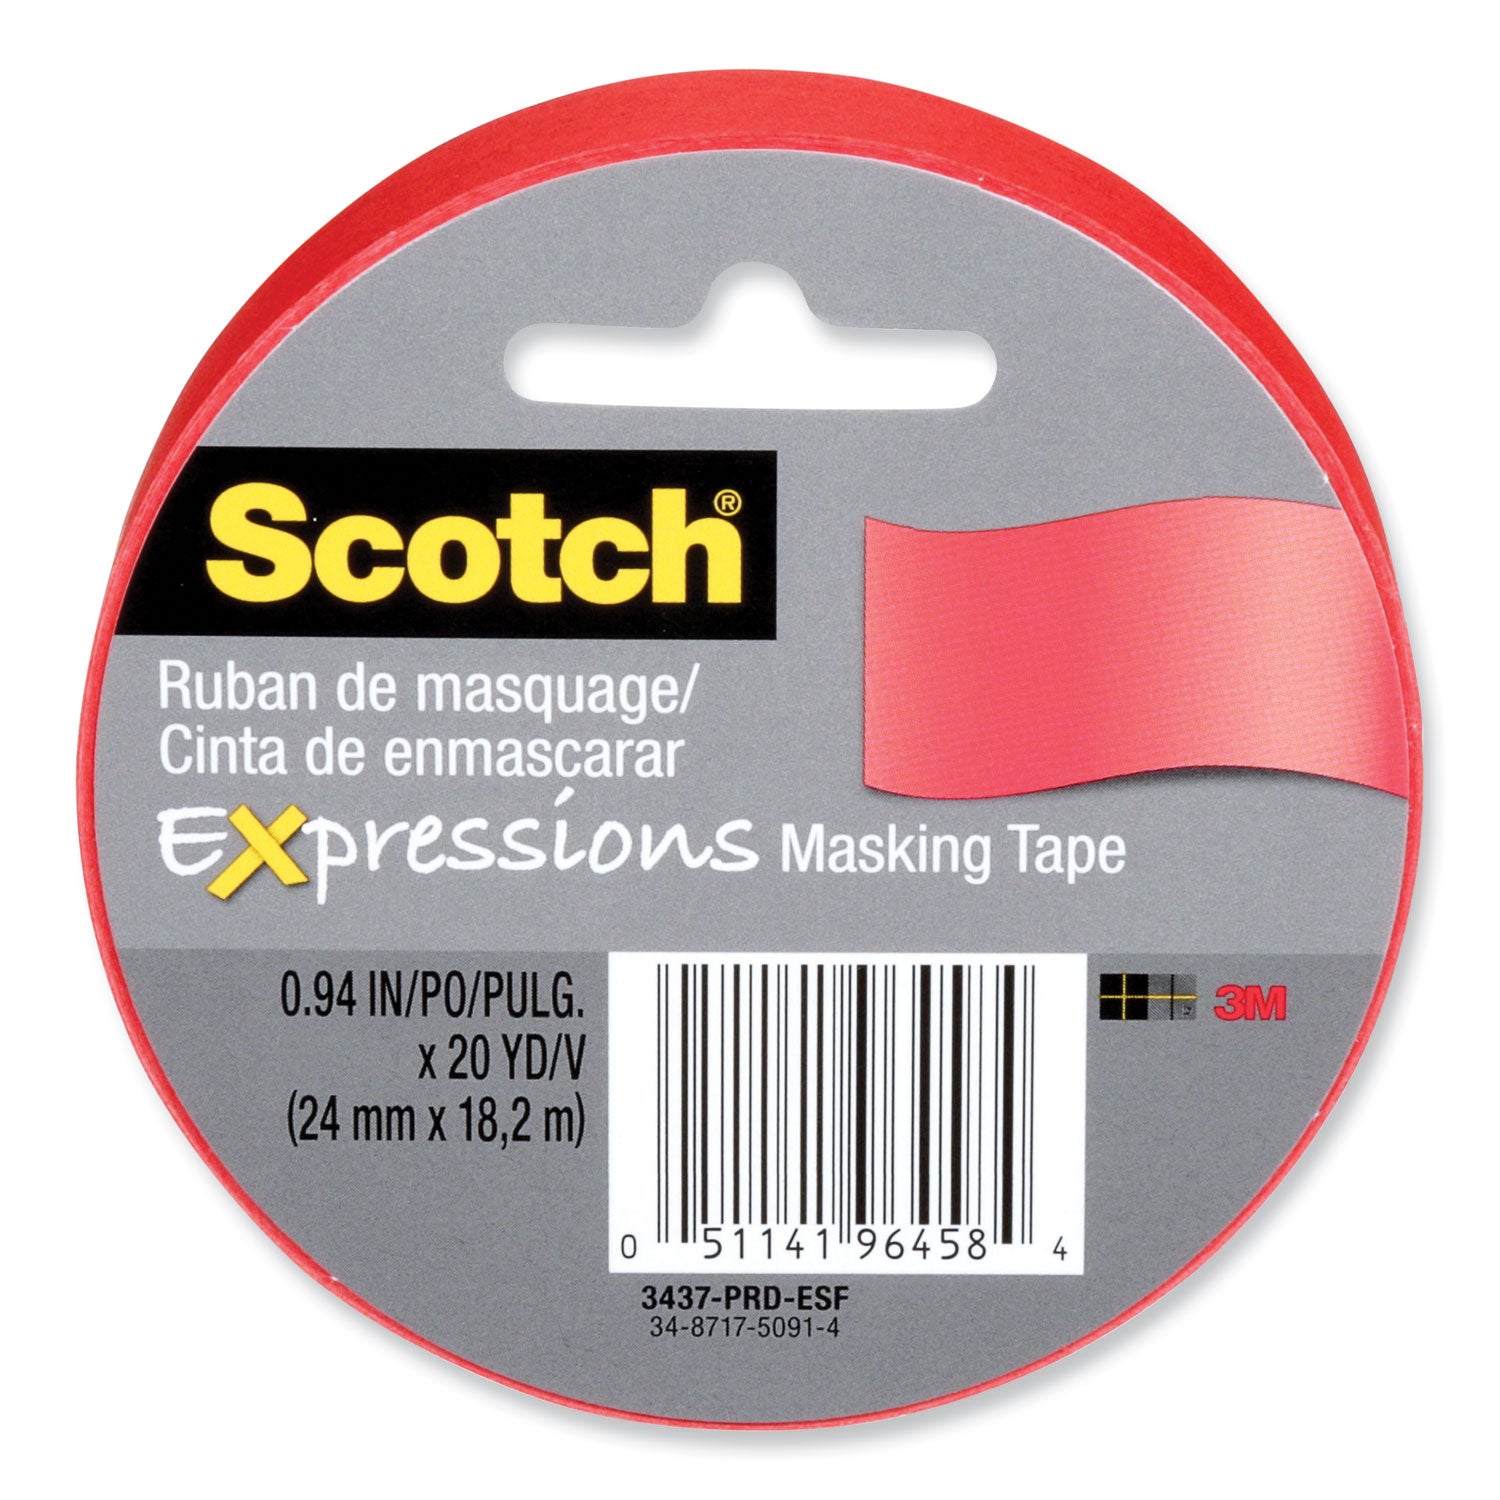 Expressions Masking Tape, 3" Core, 0.94" x 20 yds, Primary Red - 